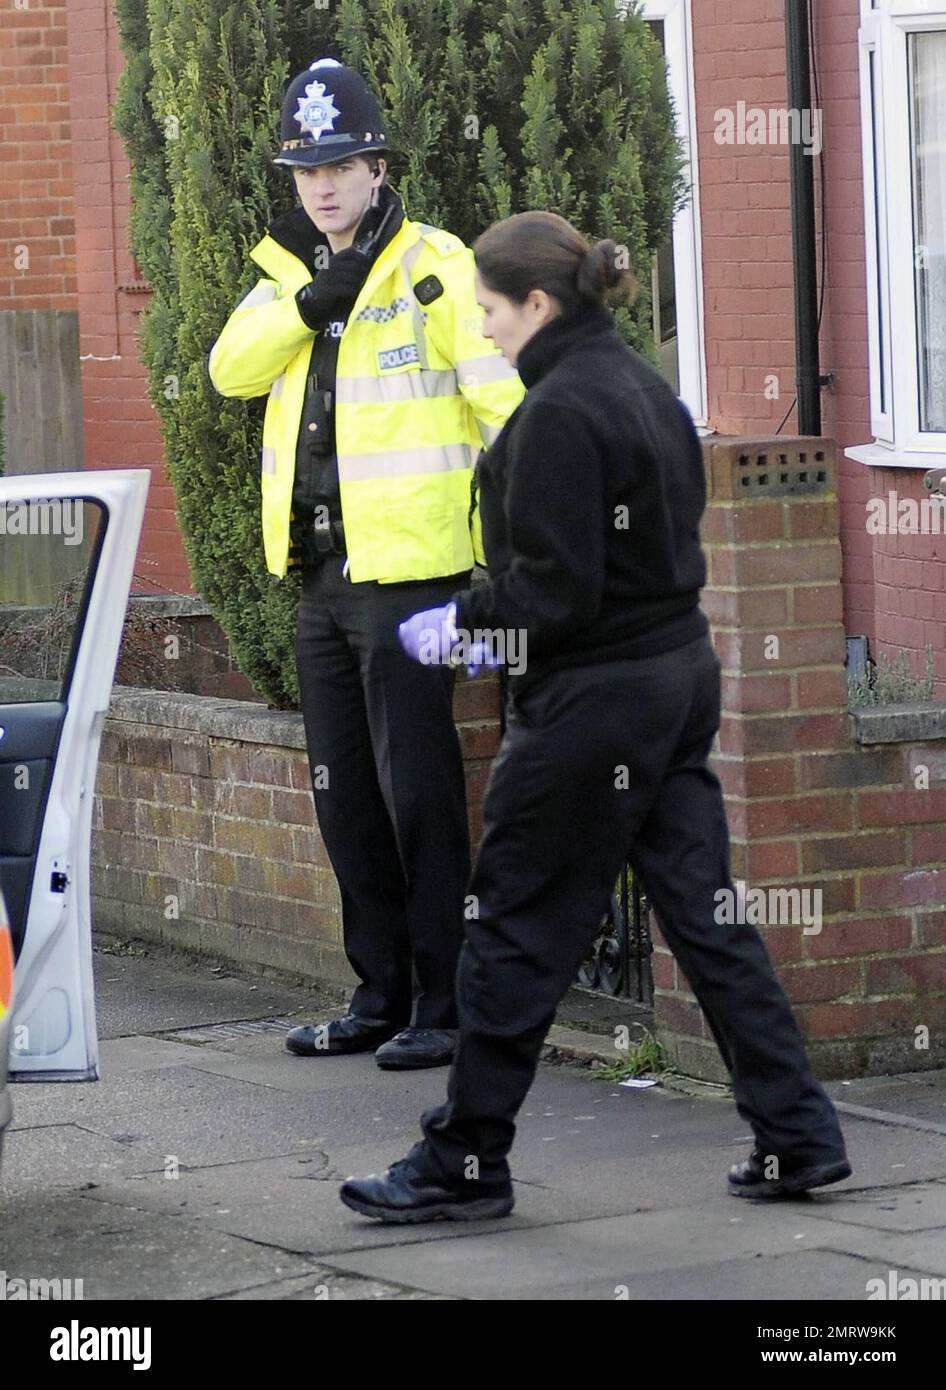 Police stand guard while neighbors and reporters gather at the Luton home where Stockholm suicide bomber suspect Taimour Abdulwahab al-Abdaly is believed to have resided prior to December 11th, the day when two bombs were detonated in Stockholm, Sweden, the second of which killed the suspected bomber who has yet to be identified.  Police searched the Luton home after reportedly obtaining a search warrant under the Terrorism Act 2000, and according to reports police have said that no hazardous materials have been found and no arrests made. During the search a terrorist officer was seen removing Stock Photo